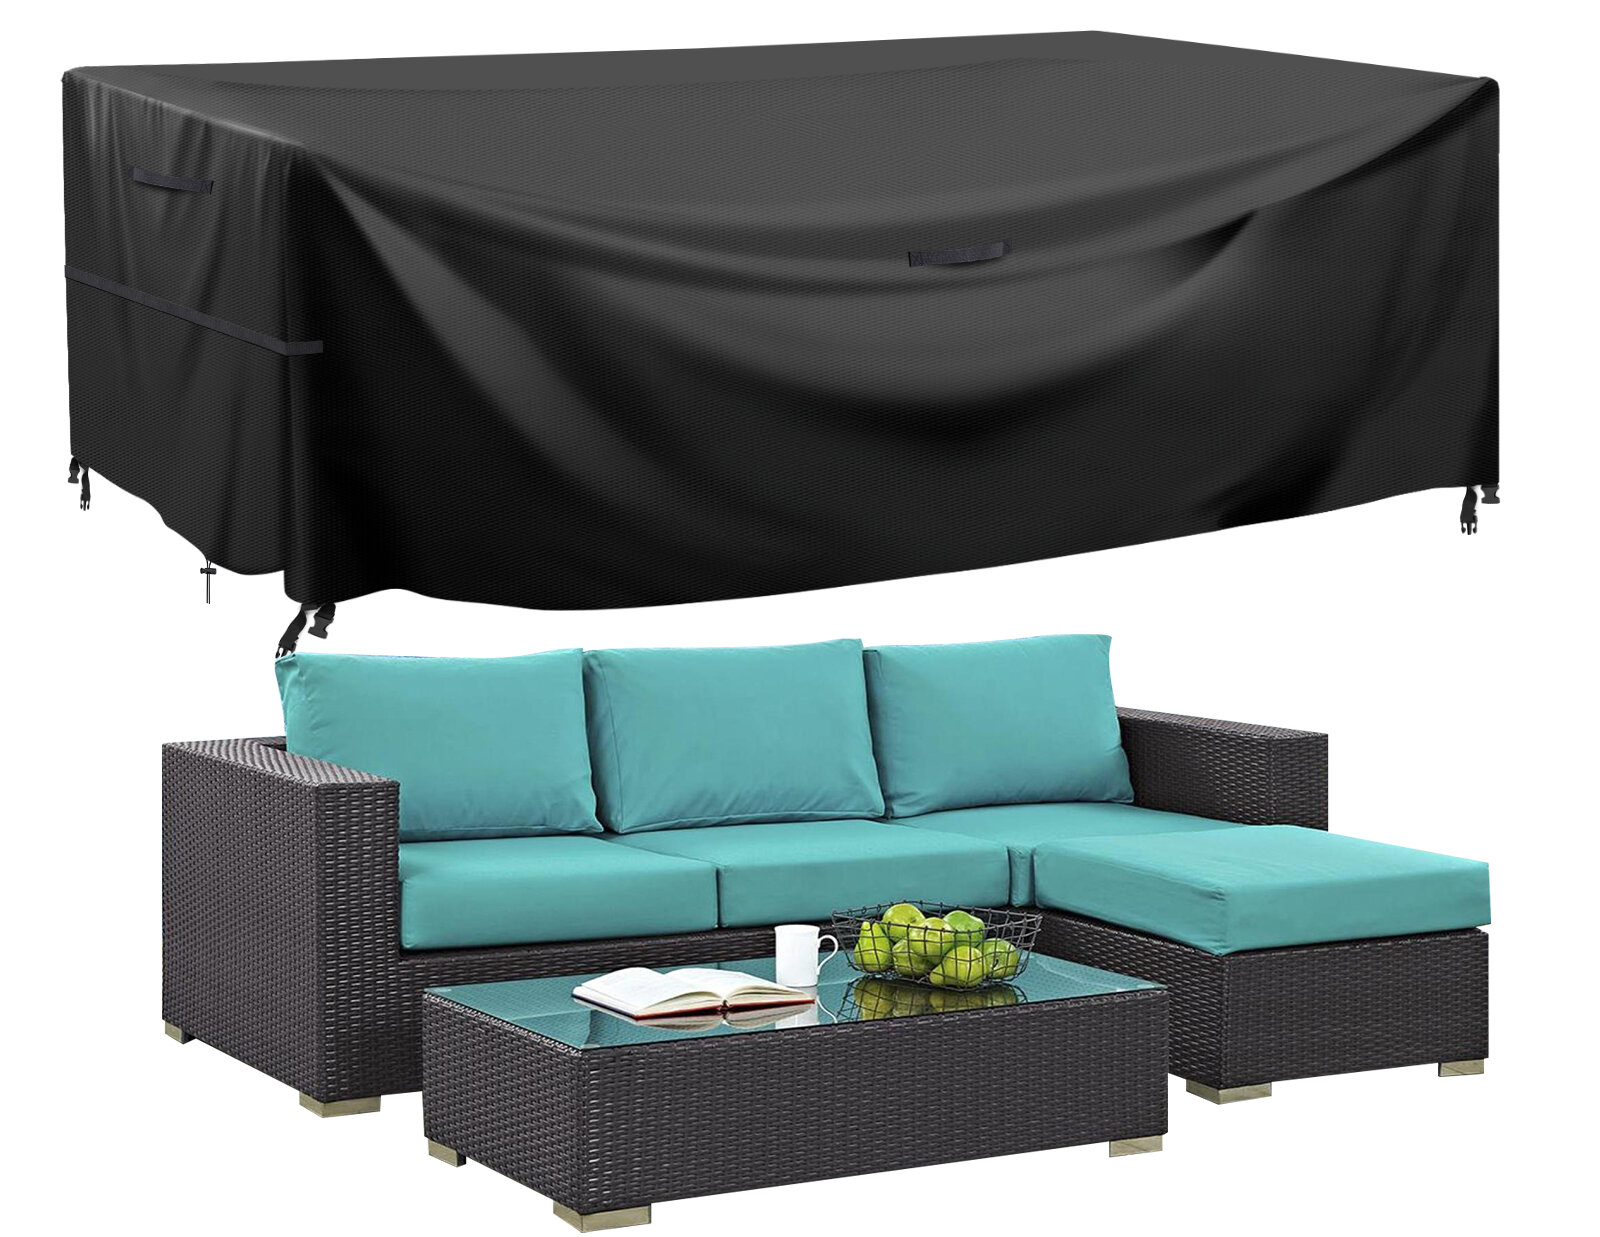 KING DO WAY 180x120x74CM 600D Table Protective Cover Desk Furniture Cover Elasticity Waterproof Durable Outdoor Househol